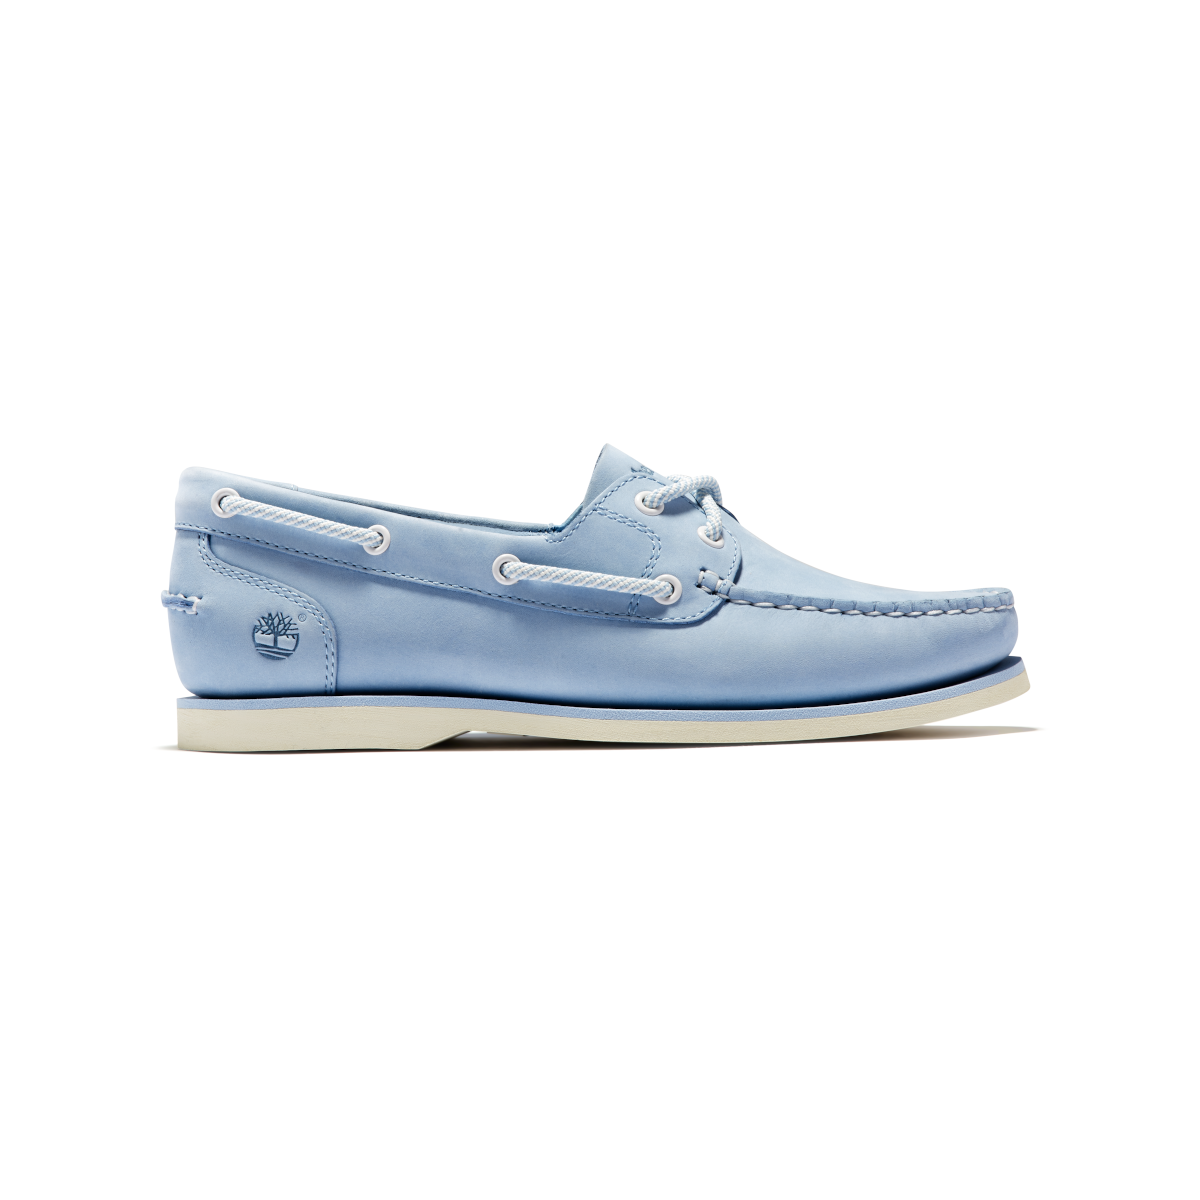 Timberland Classic Boat Unlined chaussures bateau femme bleu poudre, taille 39